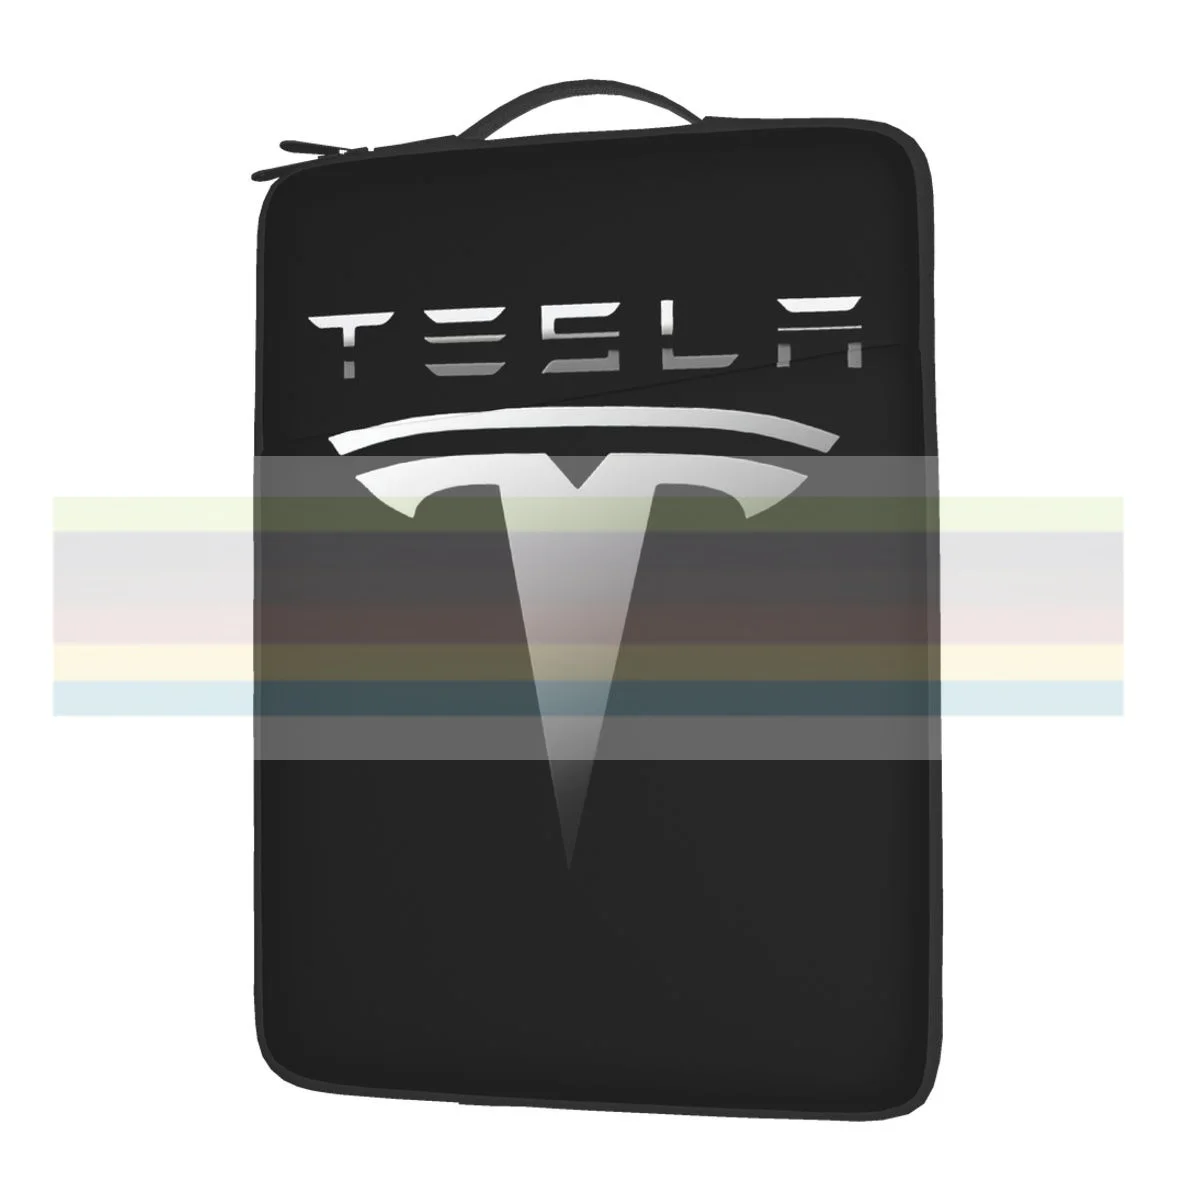 

Tesla Electric Car Logo Waterproof laptop bag 13 14 15 inch. Laptop bag protective cover for briefcase.